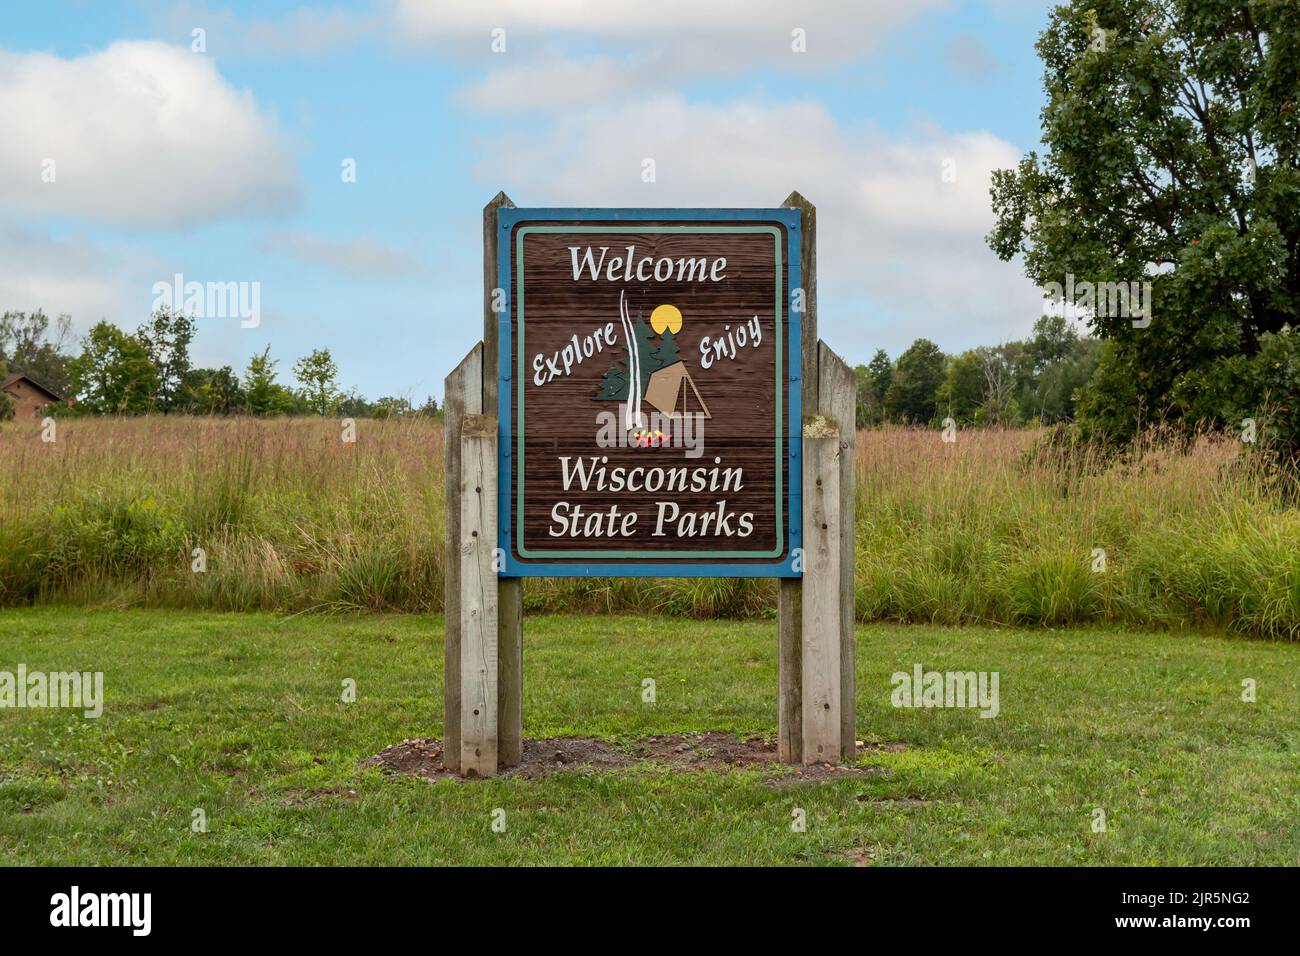 RIVER FALLS, WI, USA - AUGUST 20, 2022: Wisconsin State Park welcome sign and trademark logo. Stock Photo